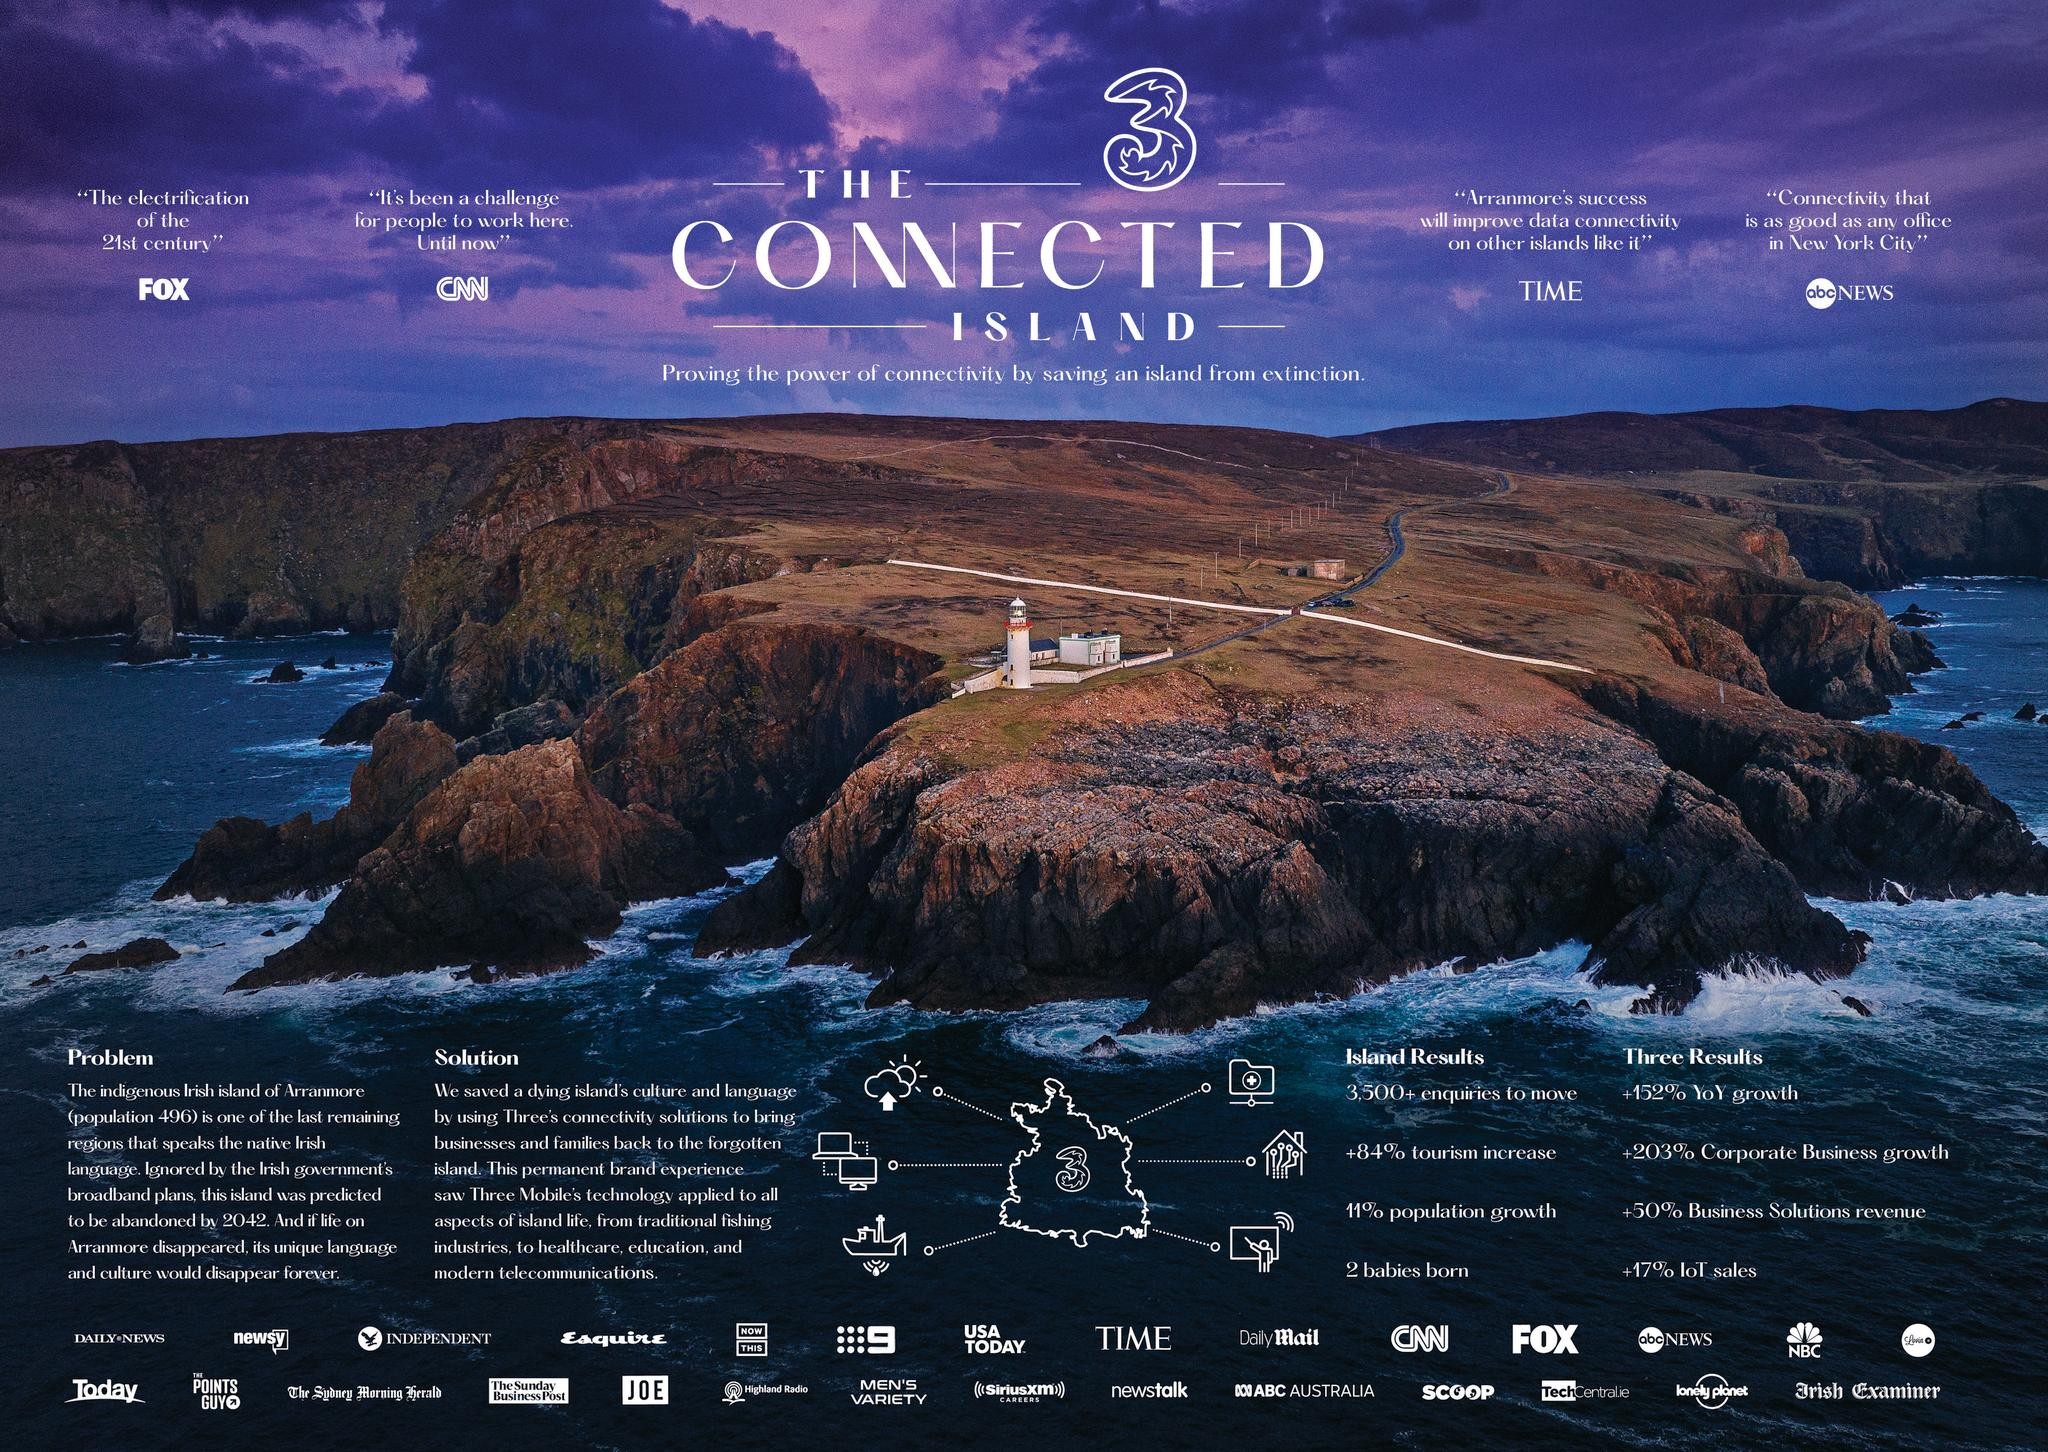 THE CONNECTED ISLAND